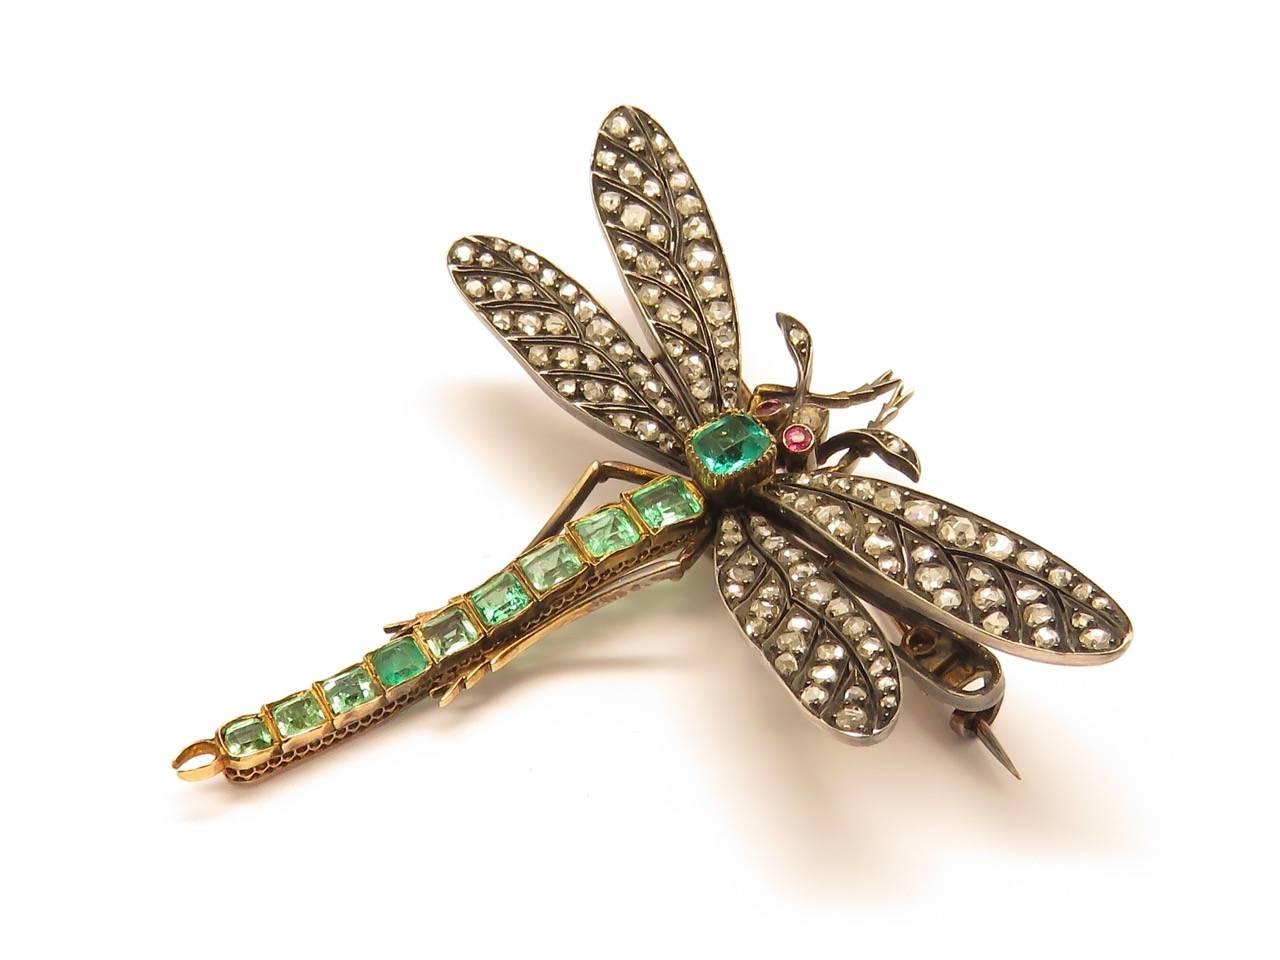 Delicate silver on gold Art Nouveau period with calibre cut emeralds set in the tail and ruby set eyes , set with  old cut diamonds mounted in 18k gold and silver.
French make.
Measurements Approximately:  61 x 61 mm  
Height: 24 inches
Width: 24